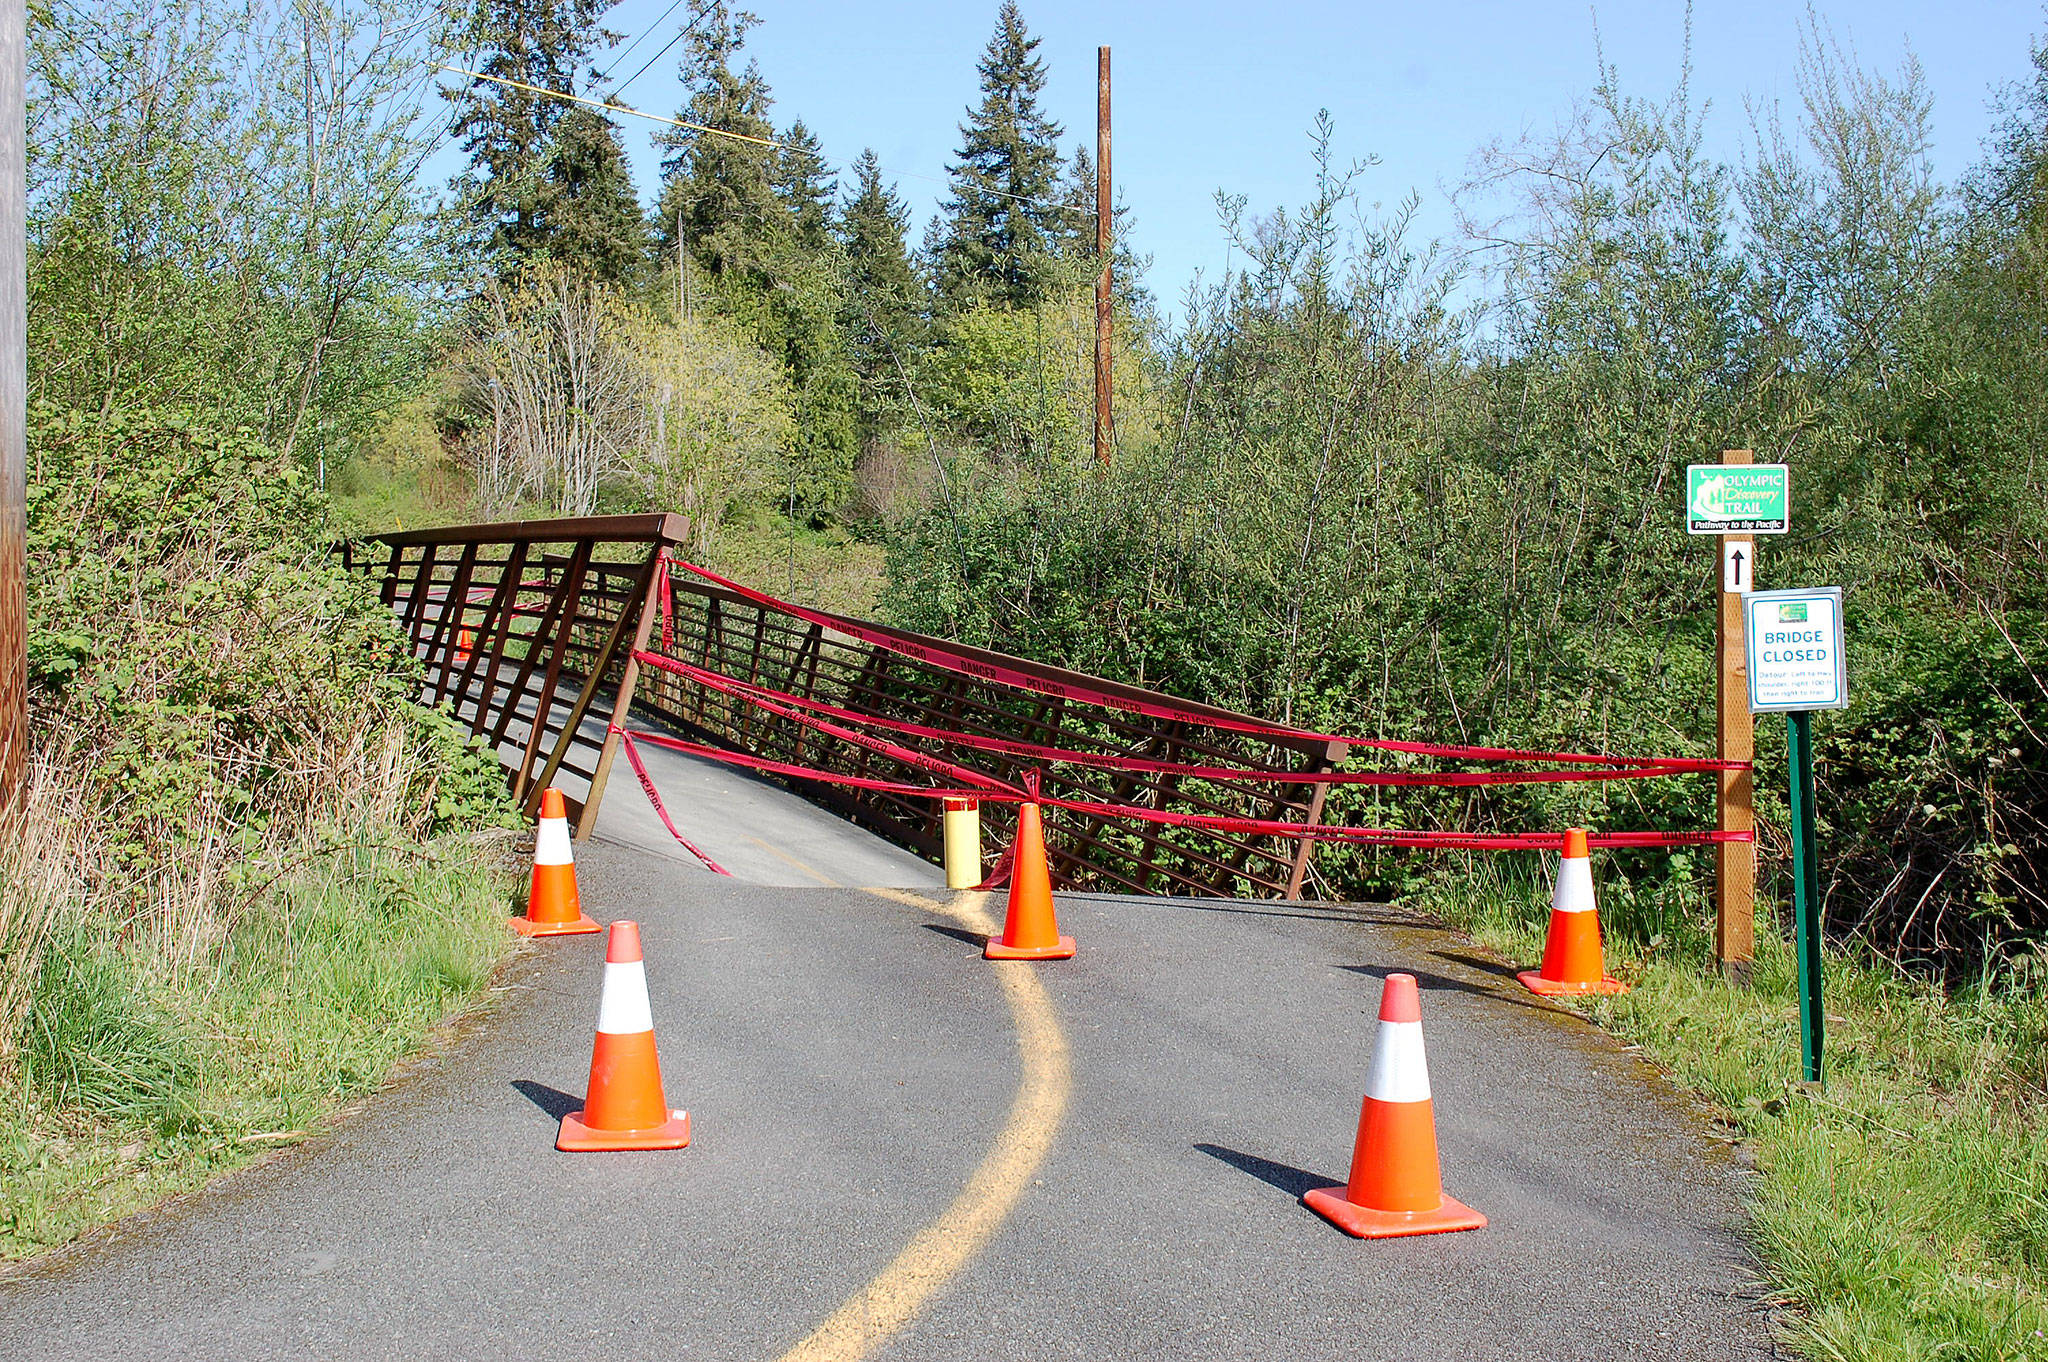 In mid-April, a portion of the Dean Creek bridge in Blyn sunk due to high water leading officials with the Jamestown S’Klallam Tribe and the Peninsula Trails Coalition to close it. No timetable has been set for its repair. Sequim Gazette photo by Erin Hawkins